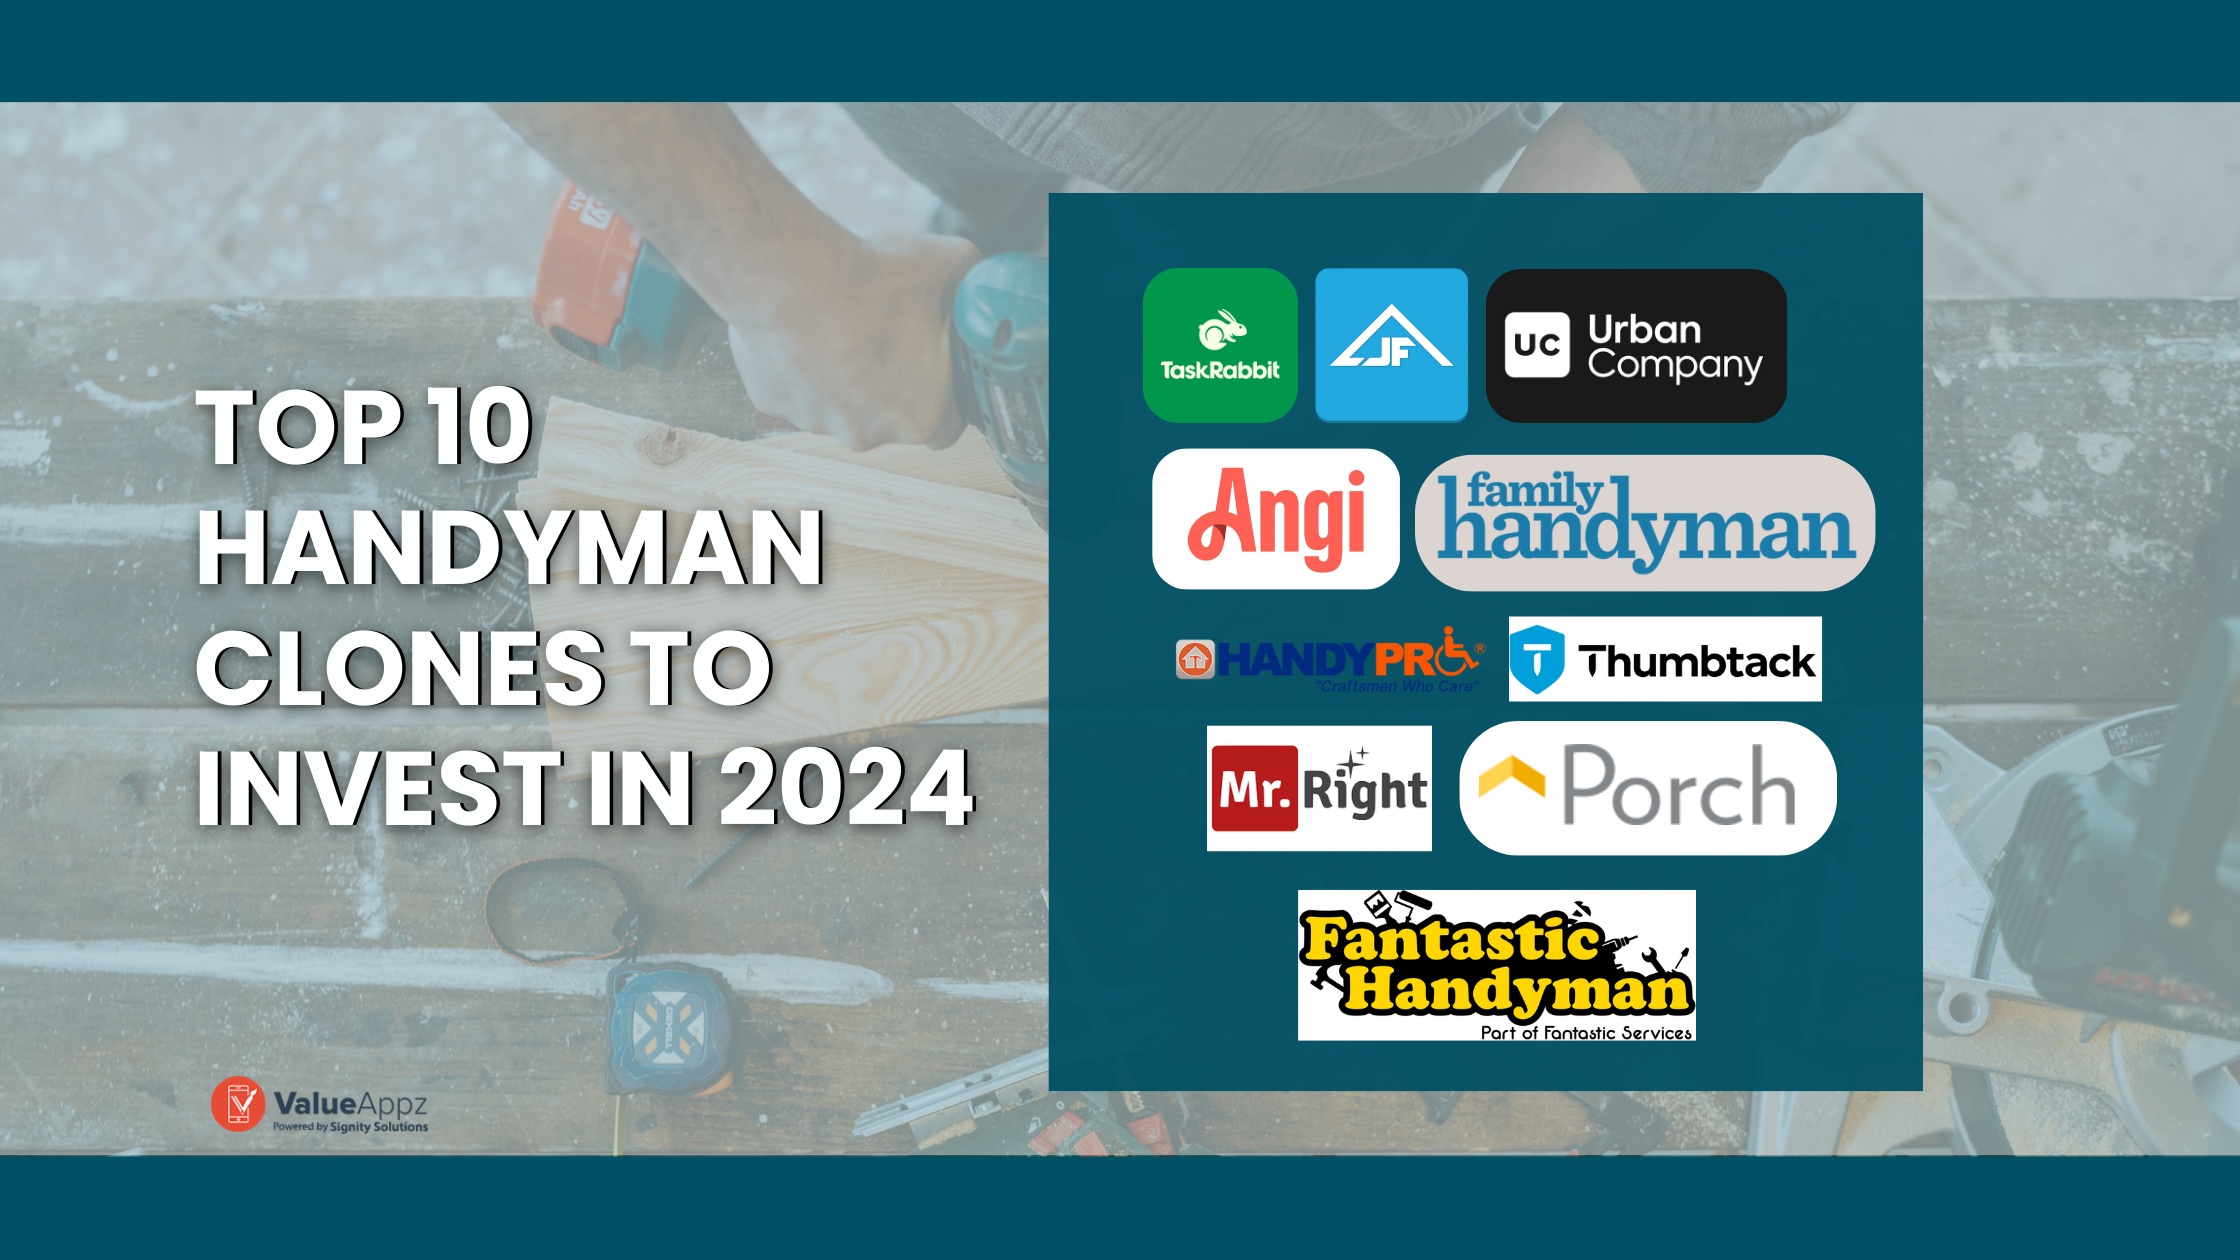 Top 10 Handyman Clones to Invest In 2024